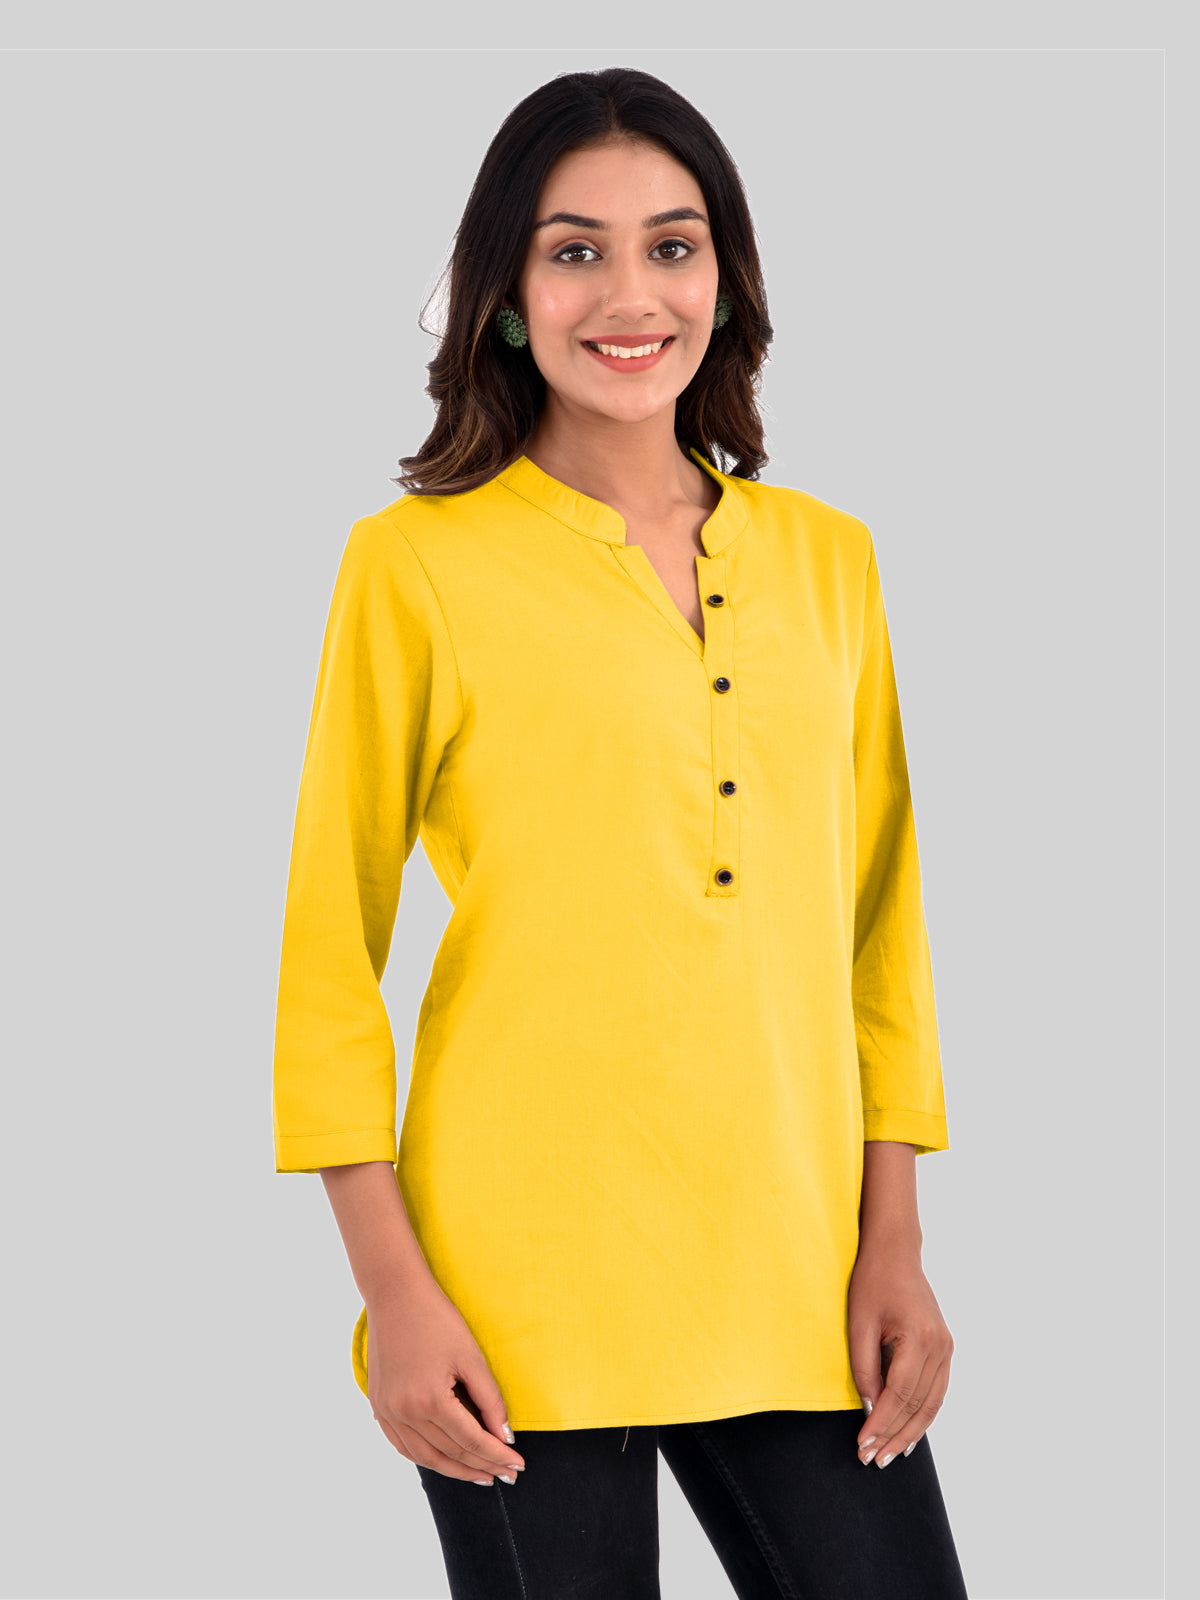 Womens Casual Three Fourth Sleeves Solid Yellow Cotton Tops